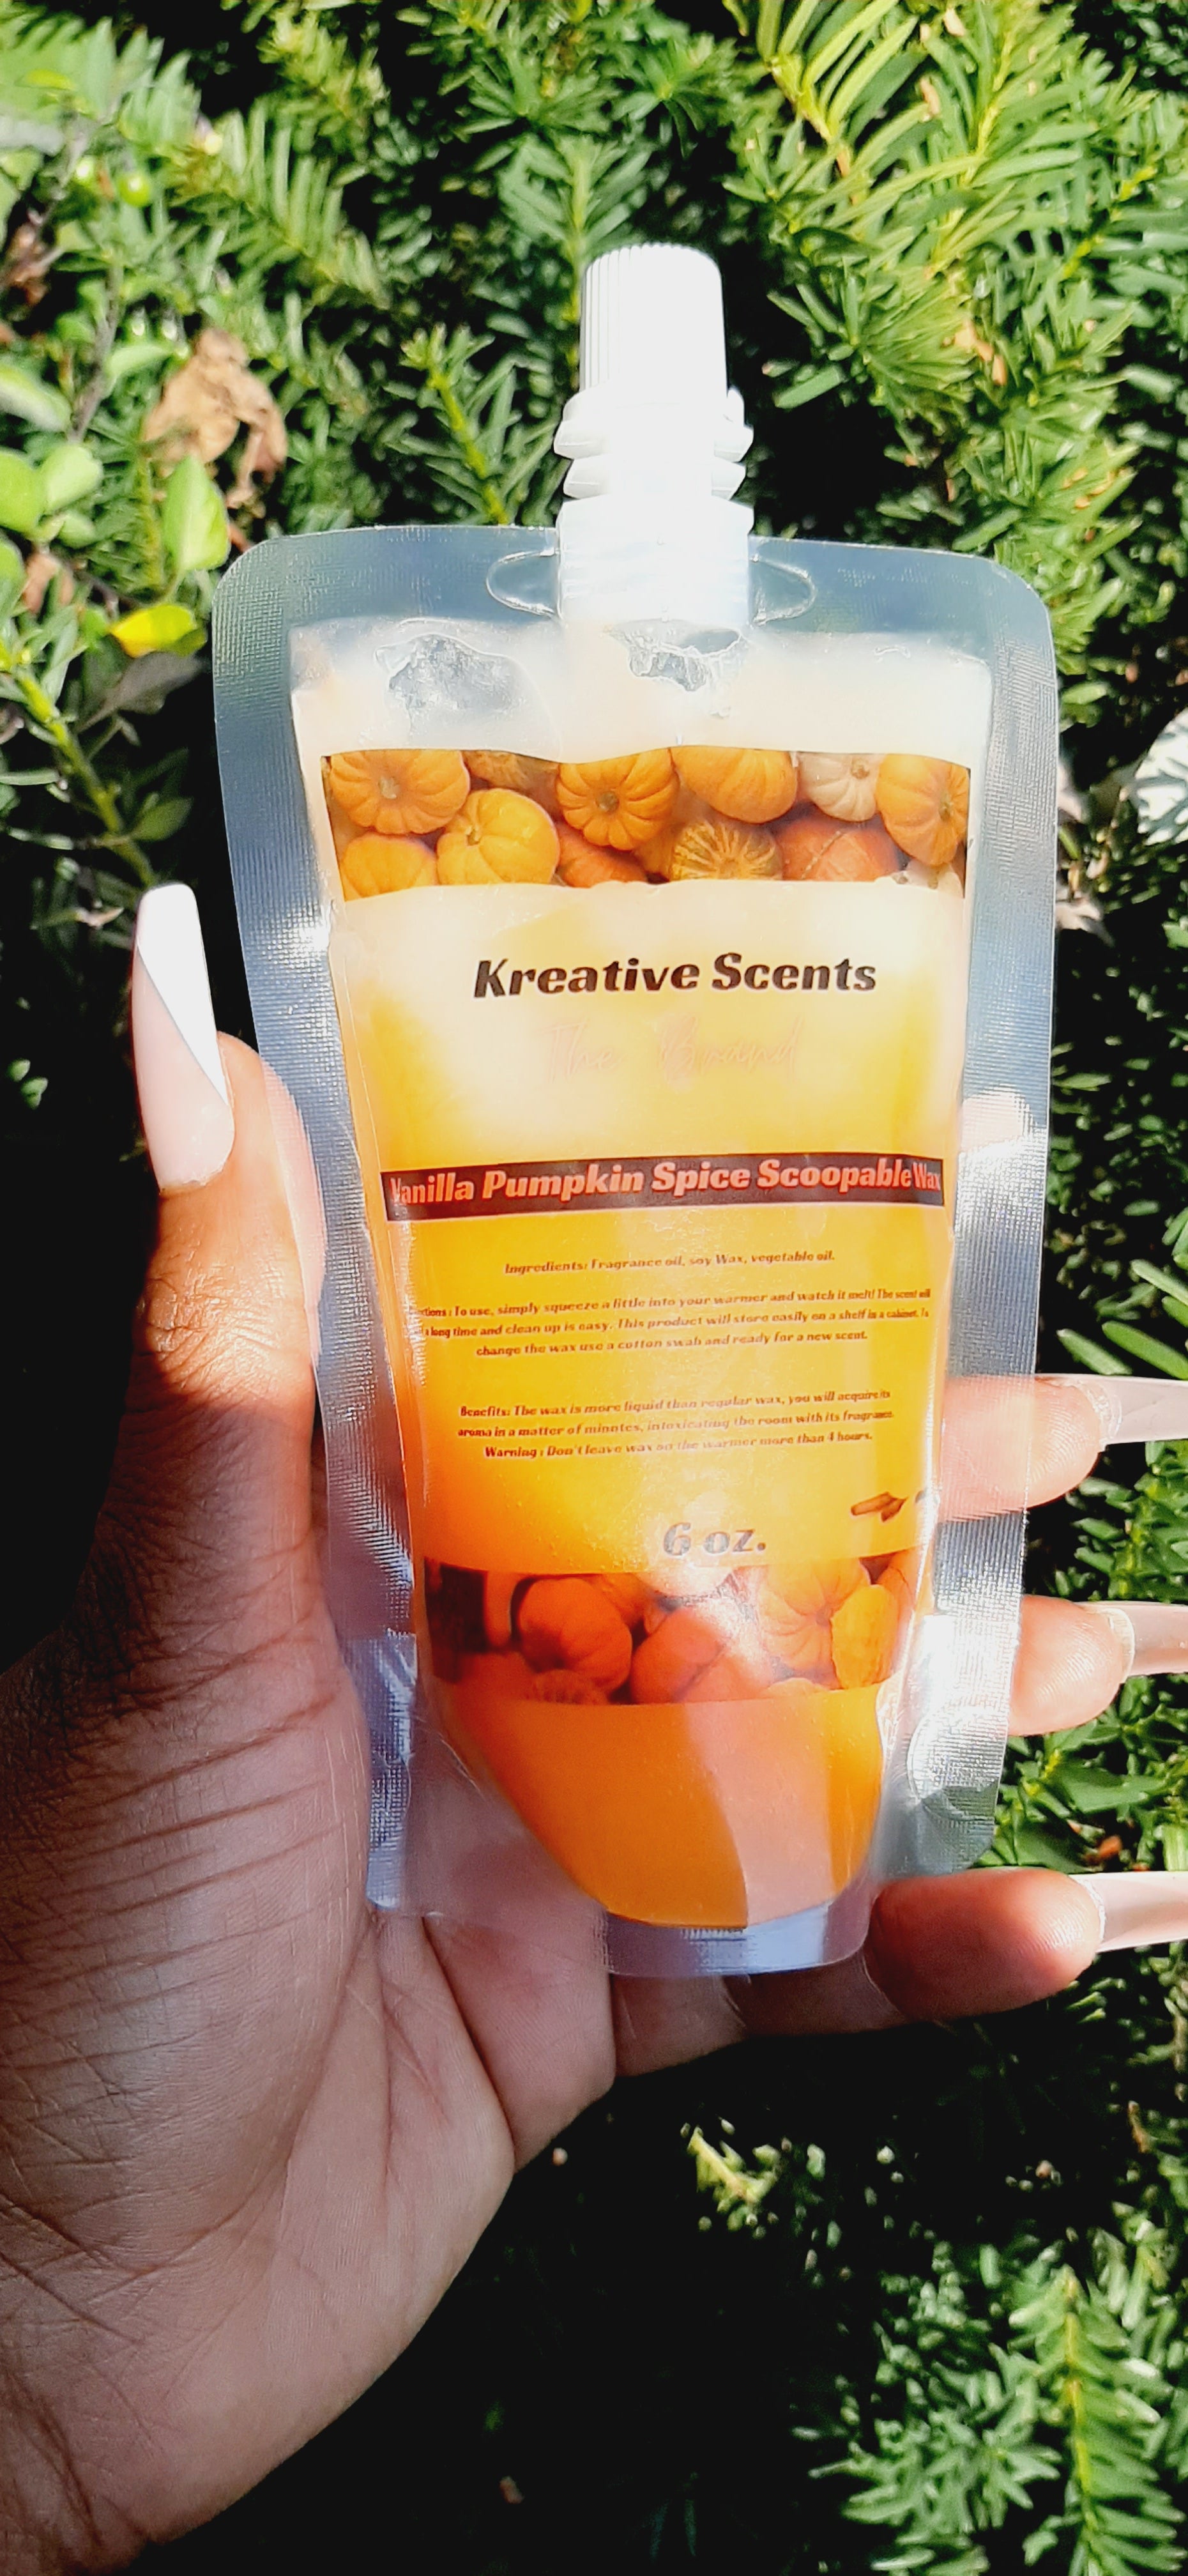 Squeeze wax melt – Kreative Scents